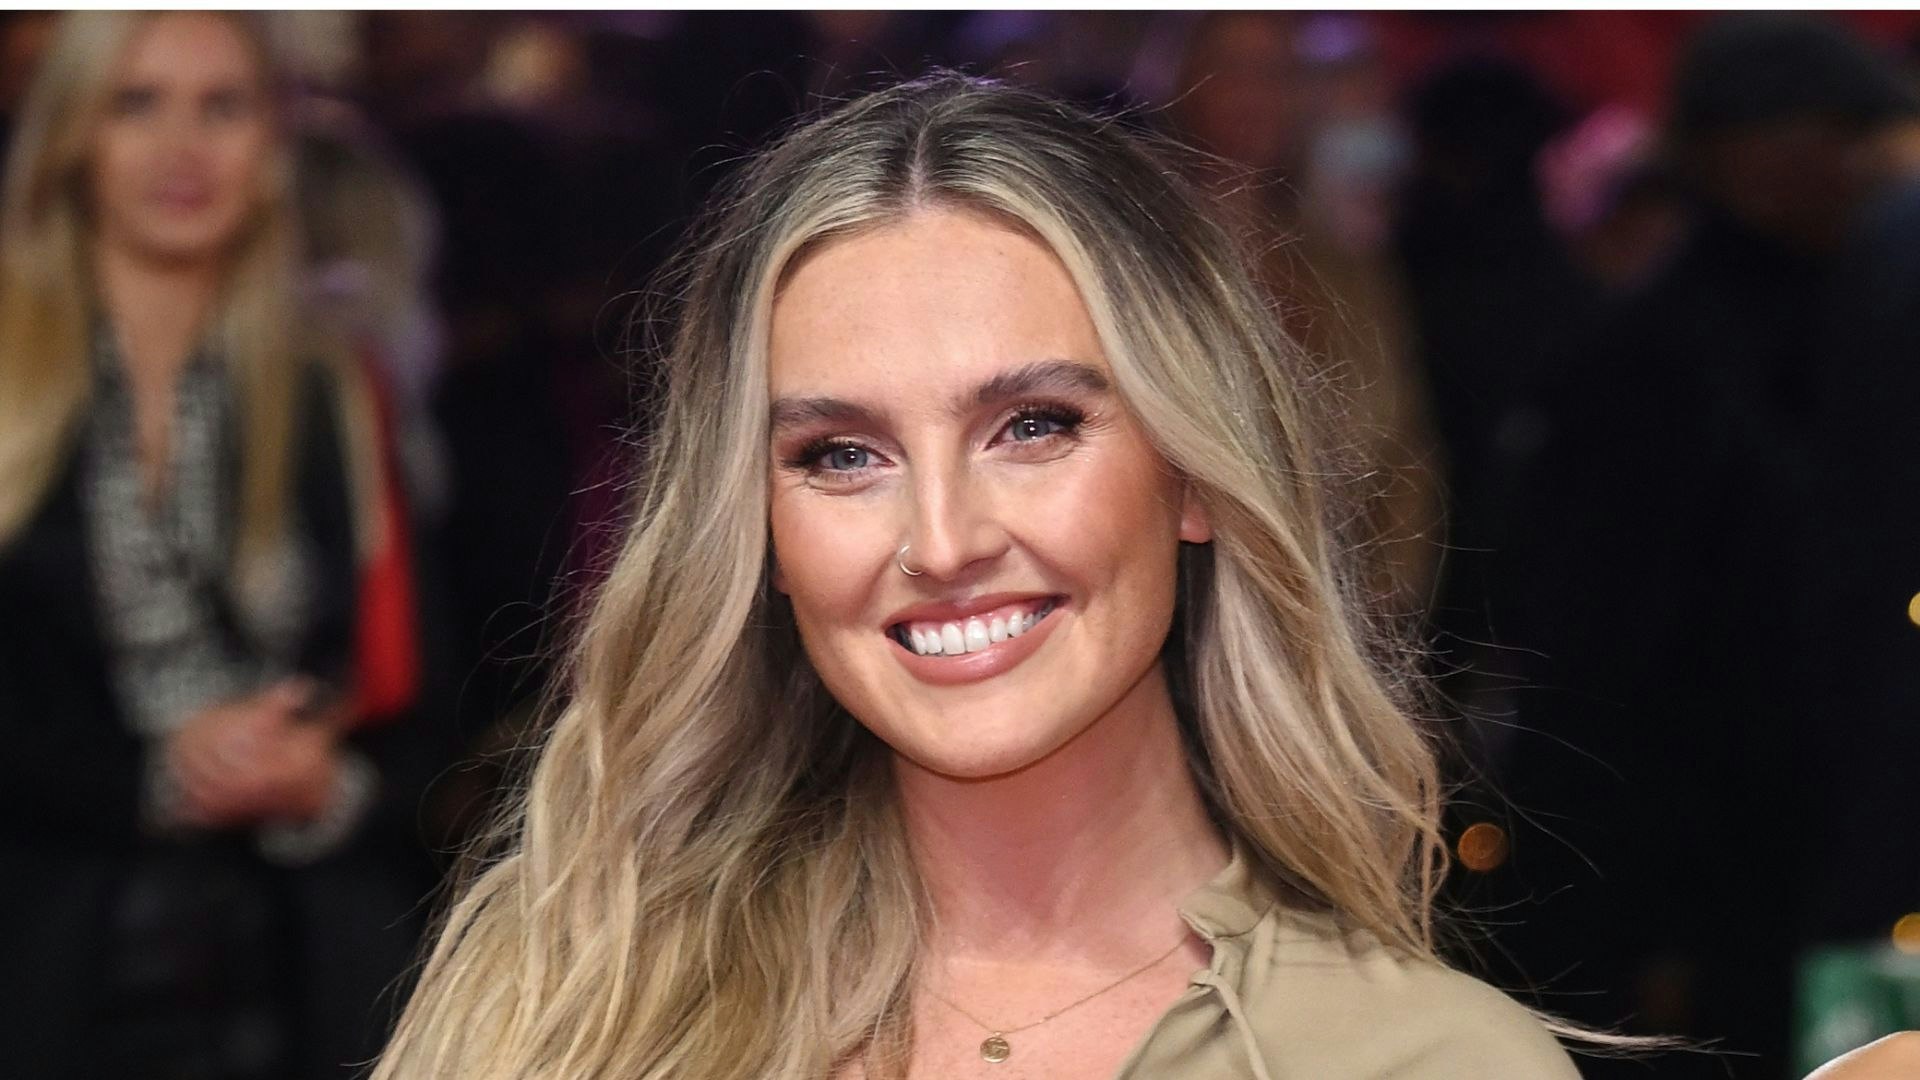 The Real Reason Why Perrie Edwards Has Never Lived With Her Fiancé